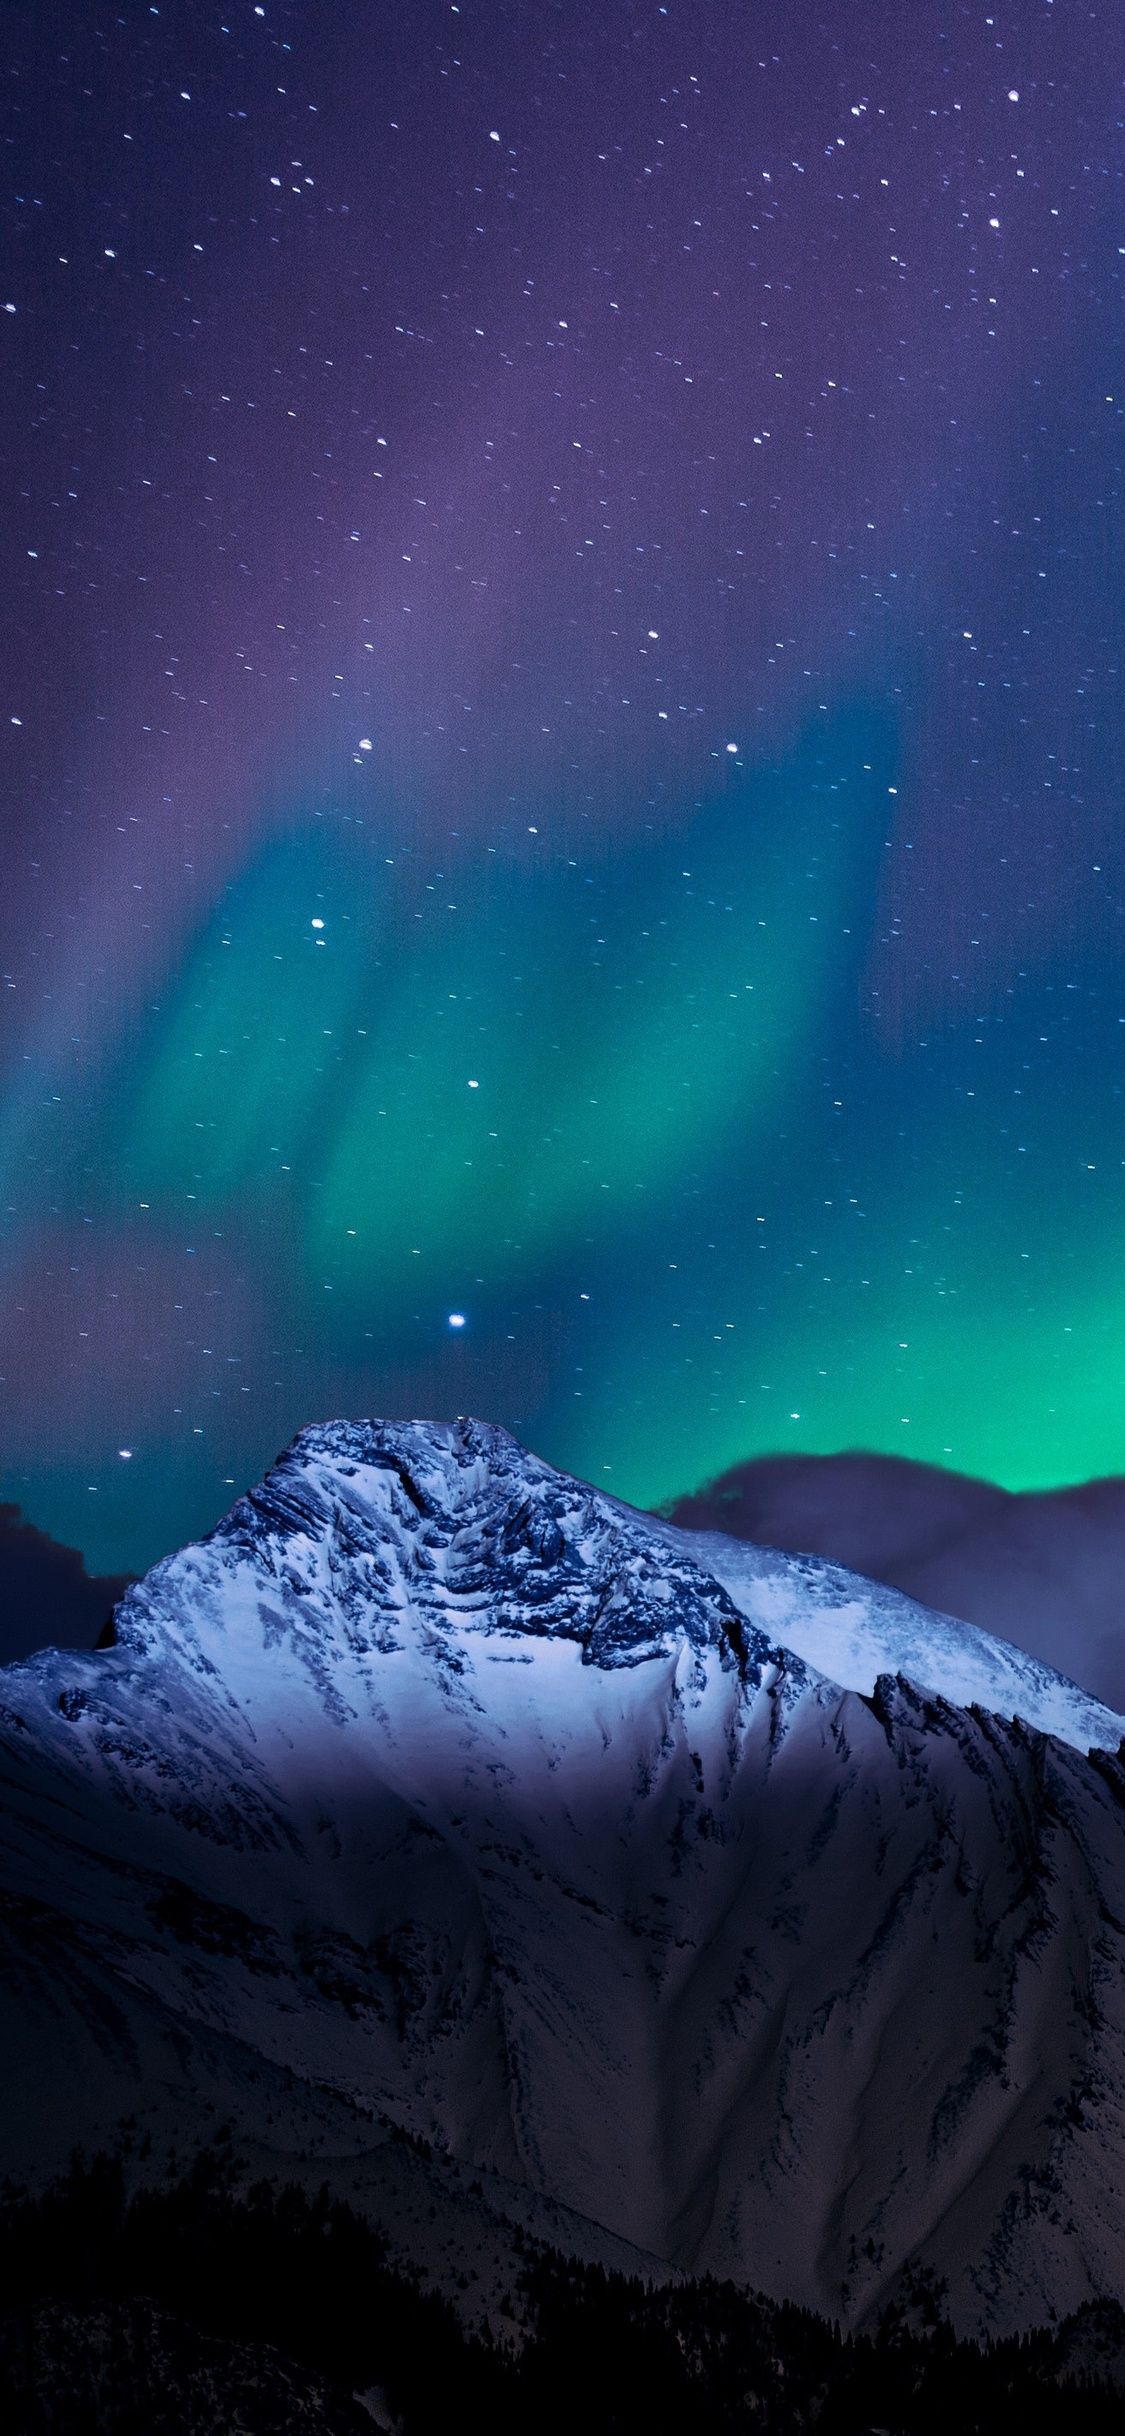 Northern Lights Night Sky Mountains Landscape 4k iPhone XS, iPhone iPhone X HD 4k Wallpaper, Image, Background, Photo and Picture